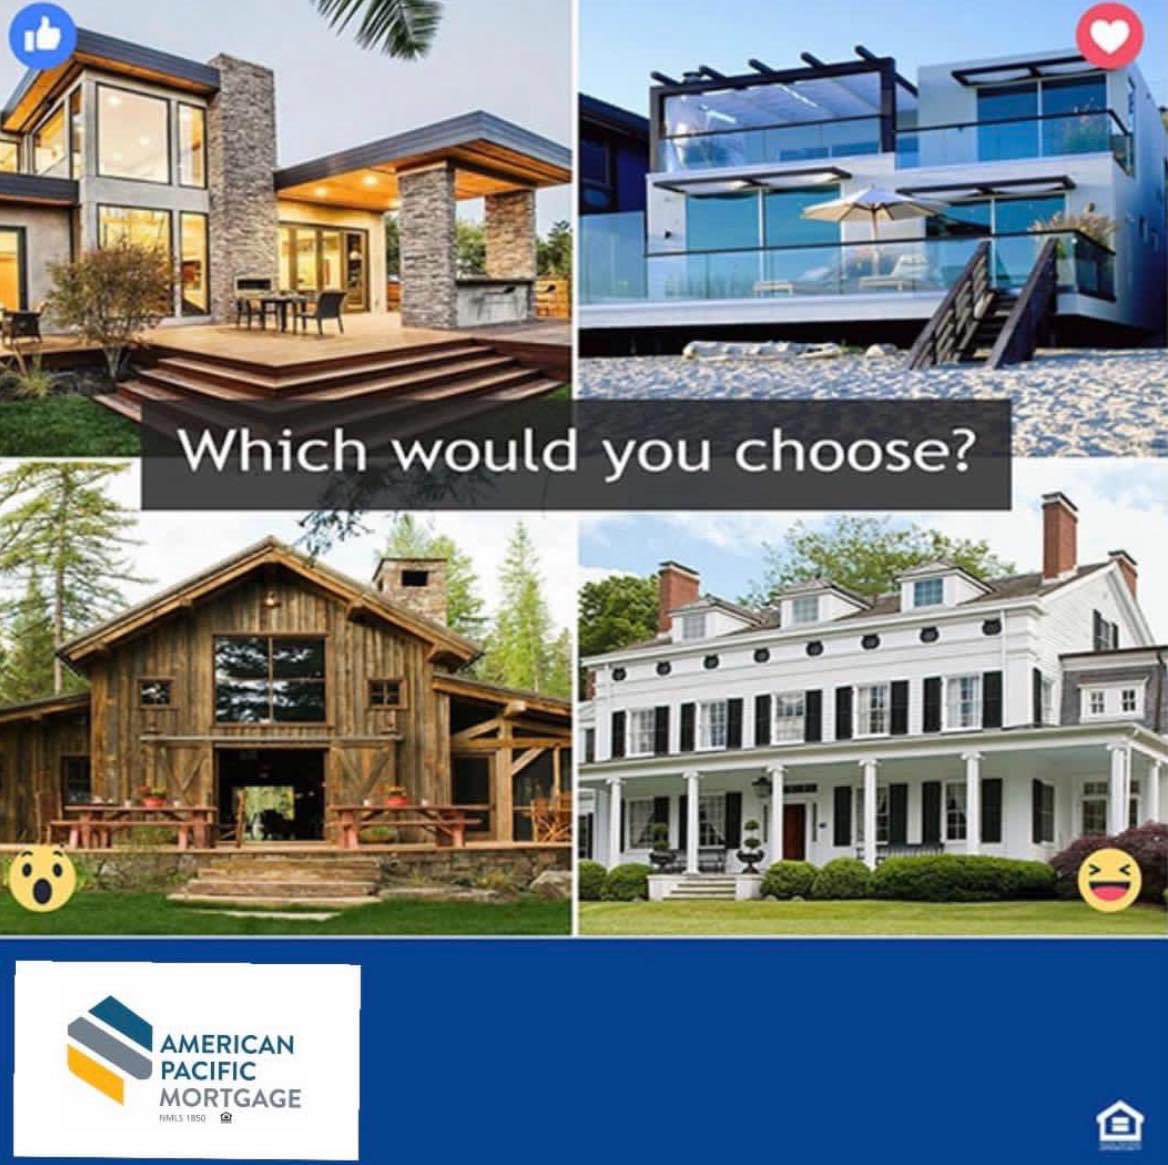 Which would you chose? 
Let us know! 

#homebuyer #homesweethome #loanofficer #mortgage #apm #APMortgage #americanpacificmortgage #houses #loan #mortgagematters #loans #house #apmlending #experiencematters #home #loanofficers #mortgages